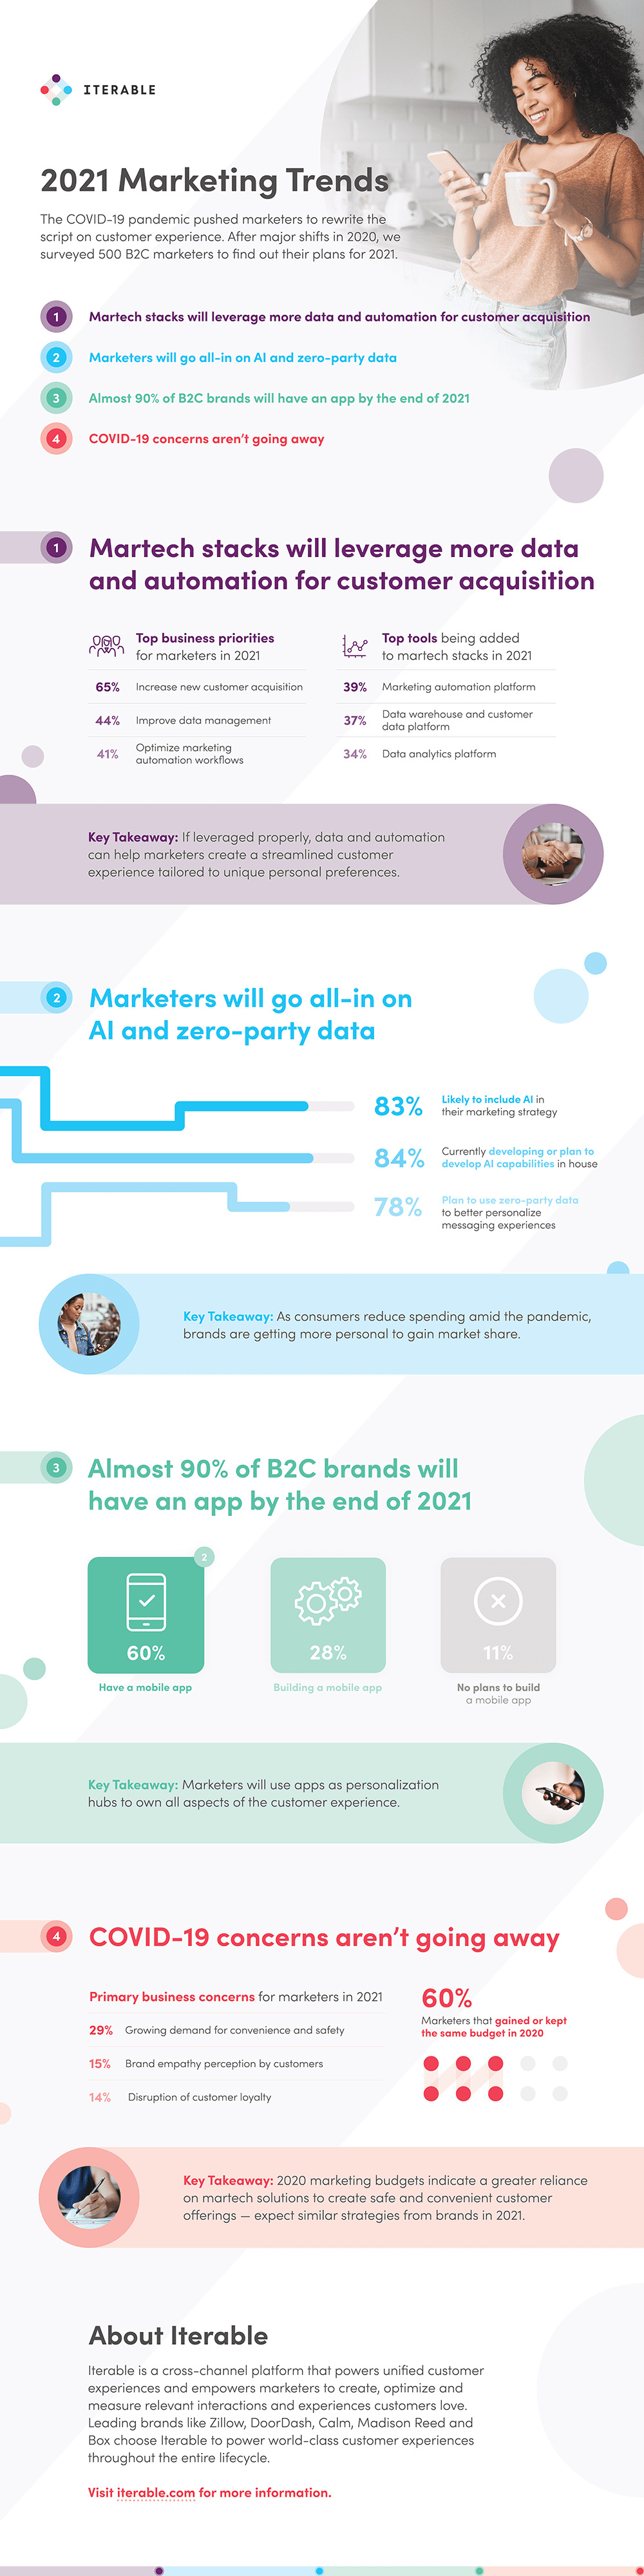 2021 Marketing Trends Infographic